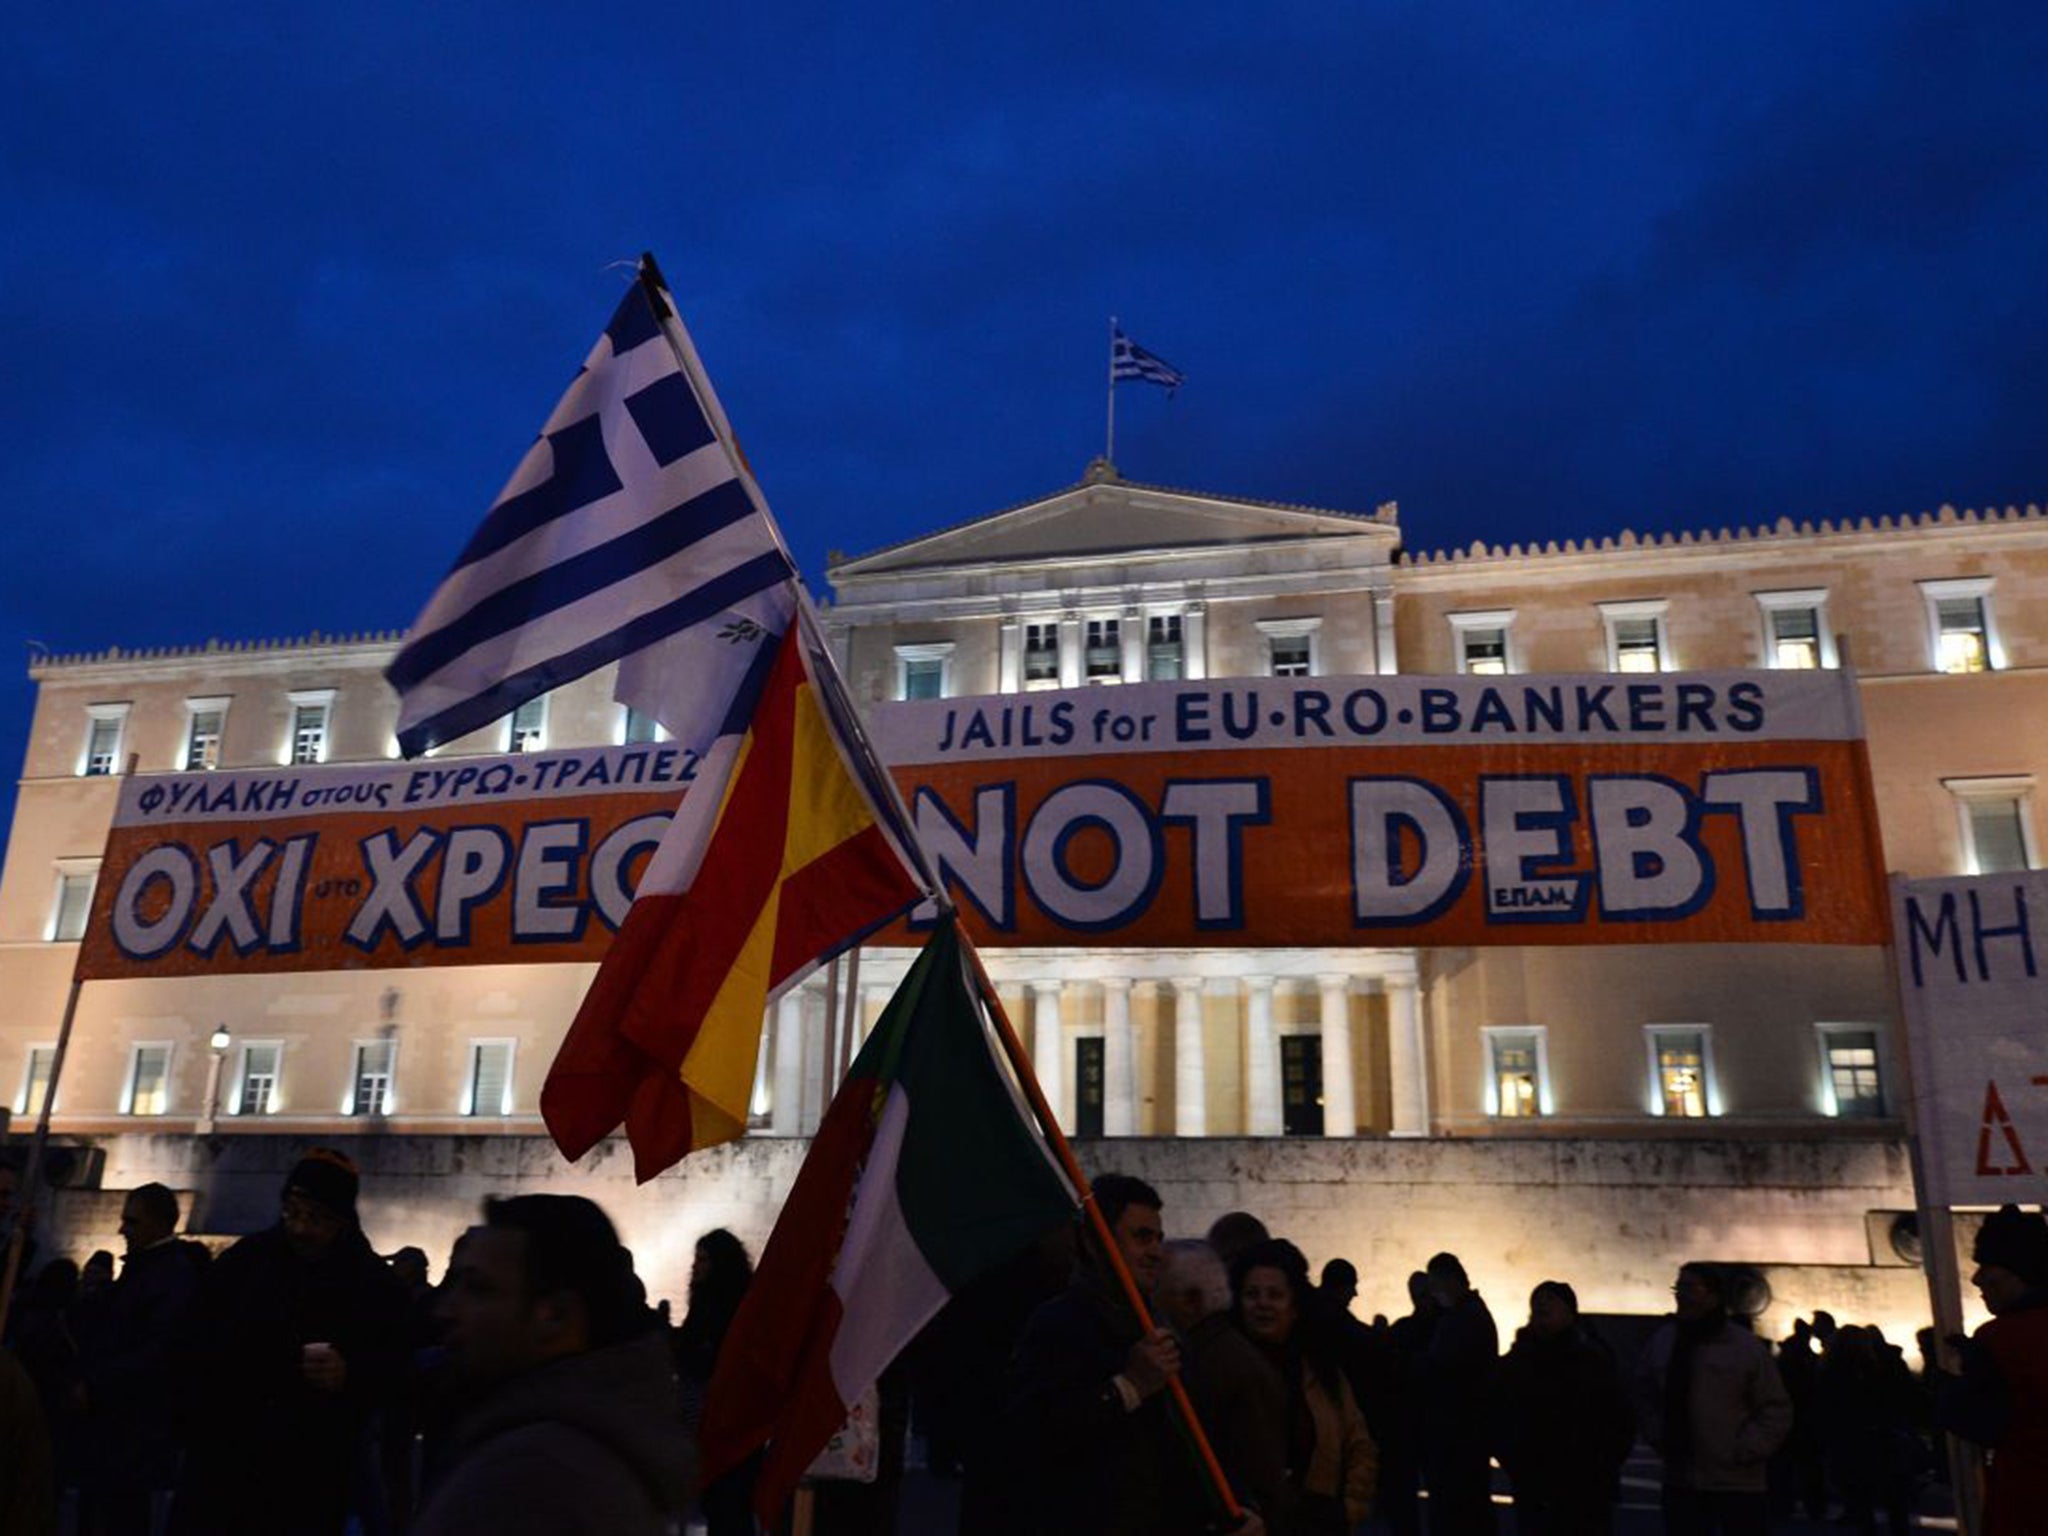 The Greek government wants to scrap its existing bailout deal, which has been worth 240 billion euros (currently £177 billion) from other countries